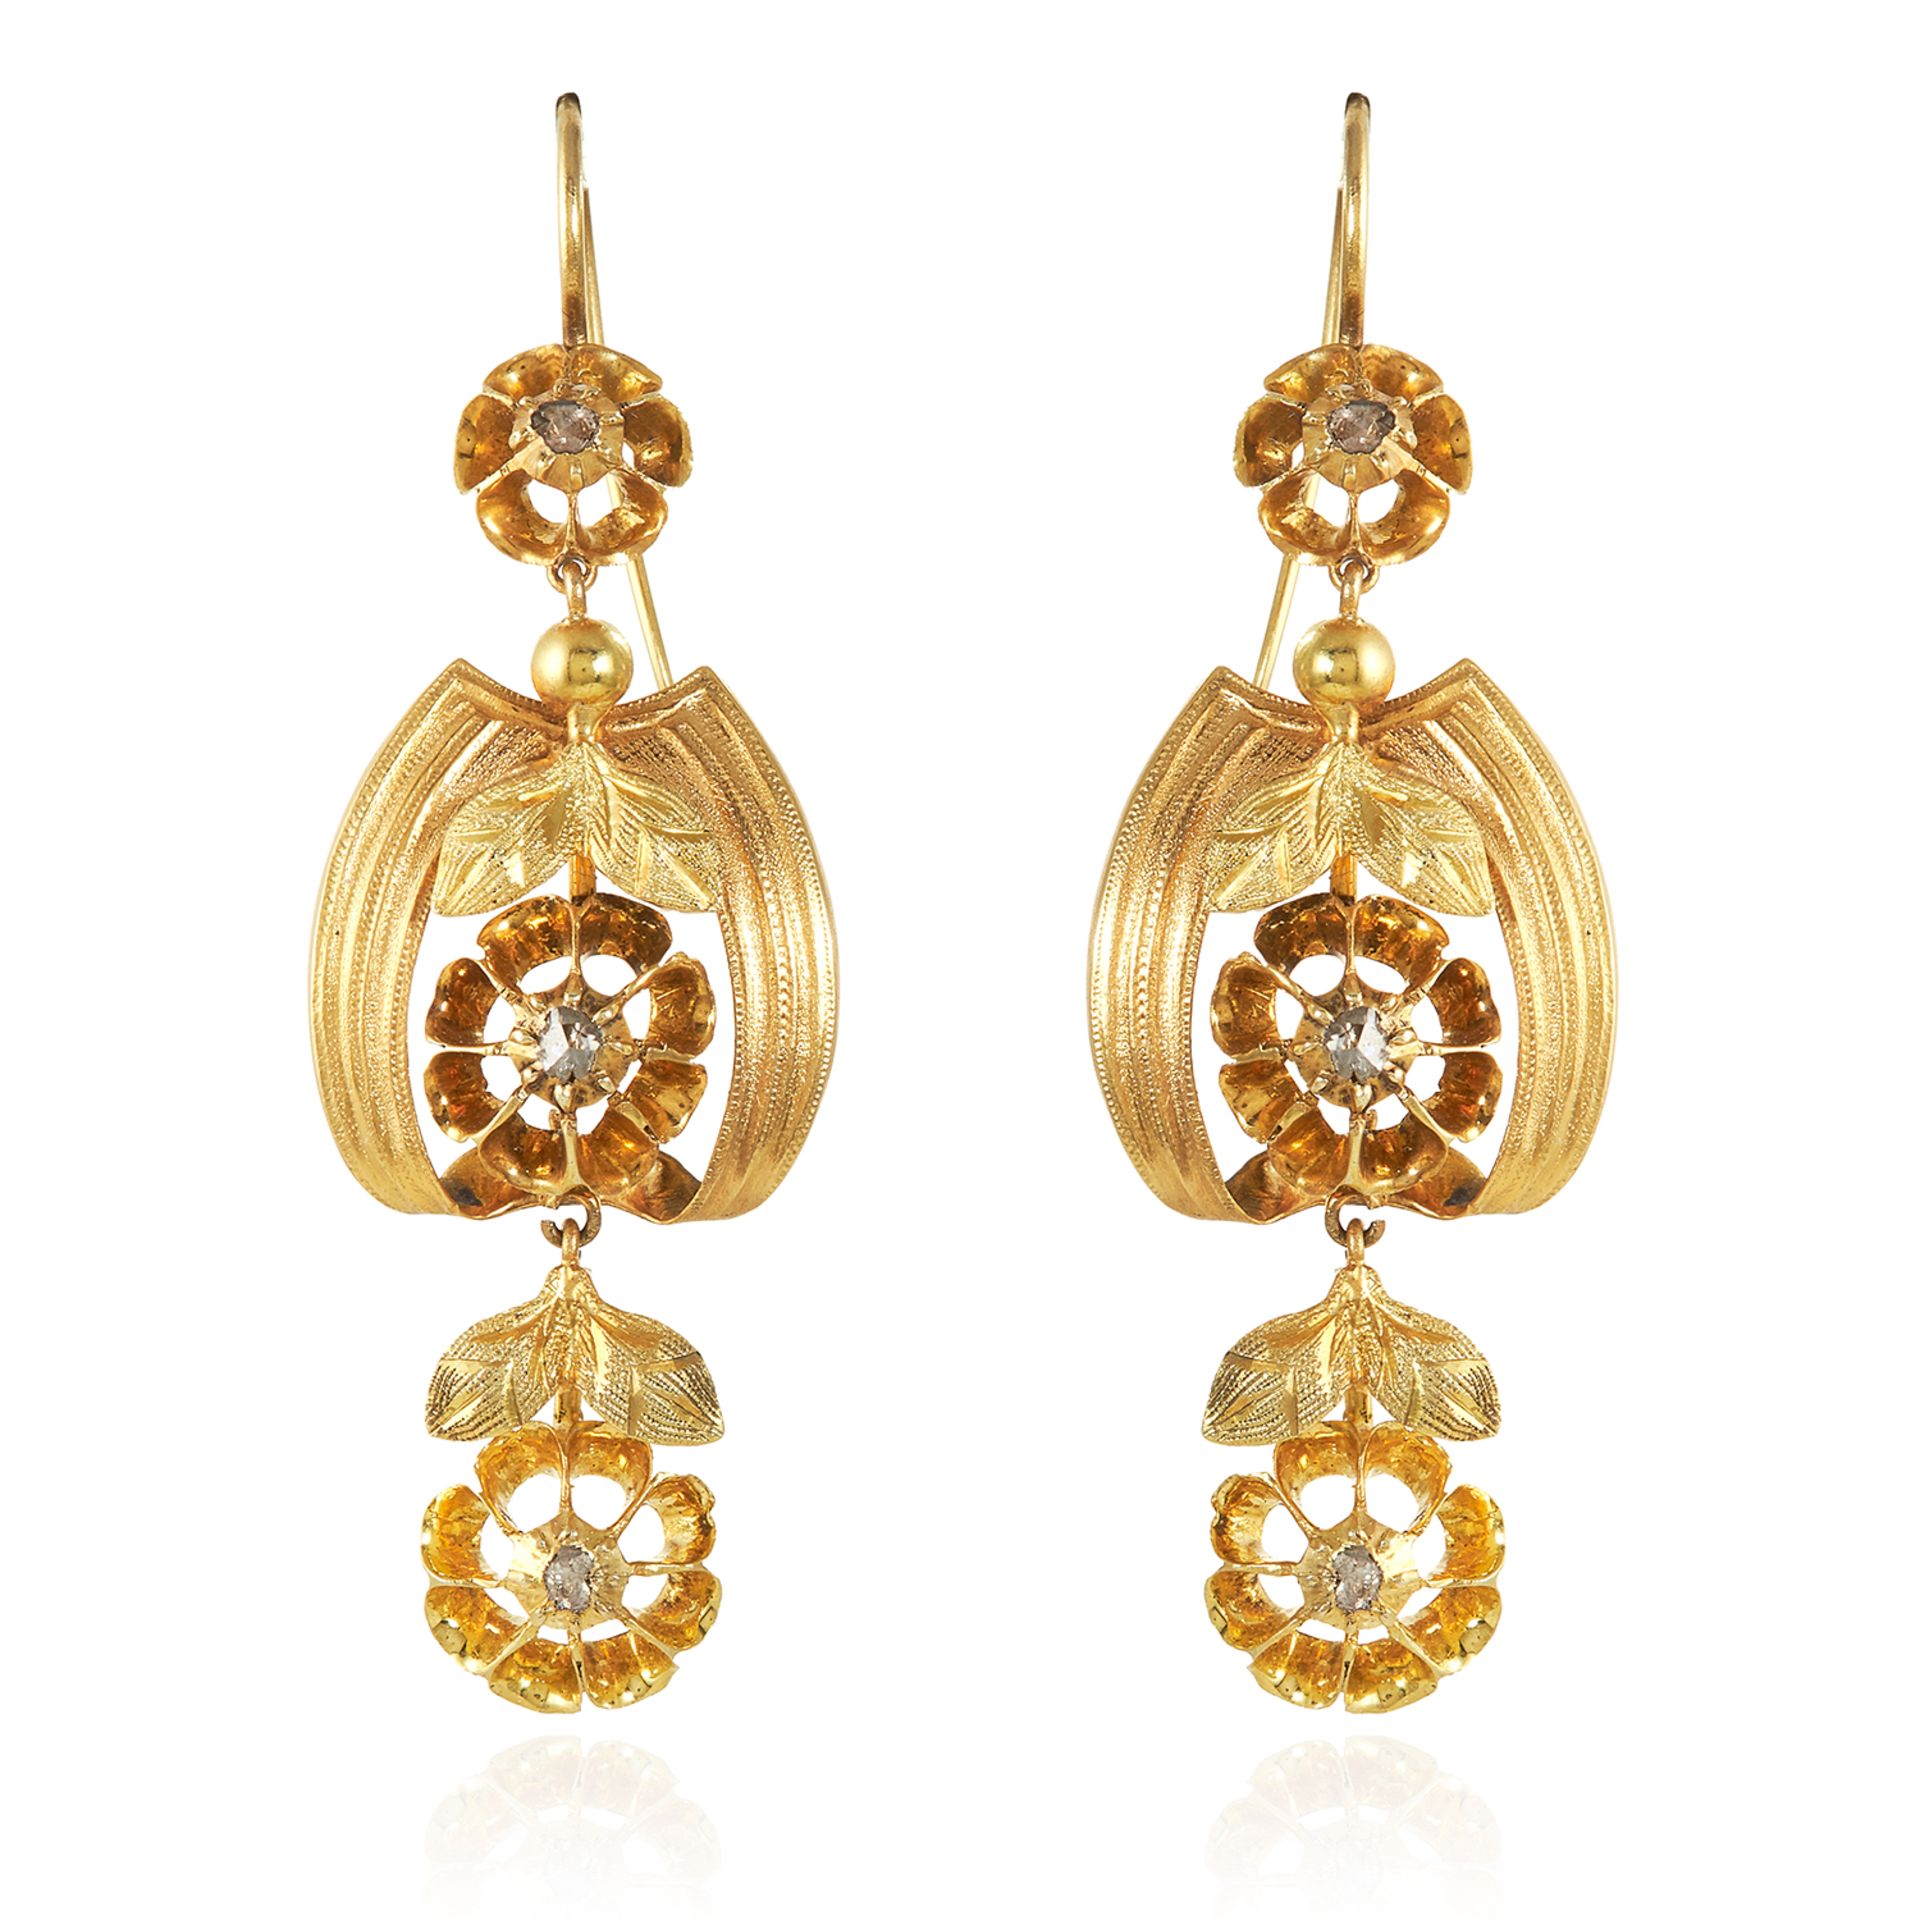 A PAIR OF ANTIQUE DIAMOND EARRINGS, 19TH CENTURY in high carat yellow gold, the articulated bodies